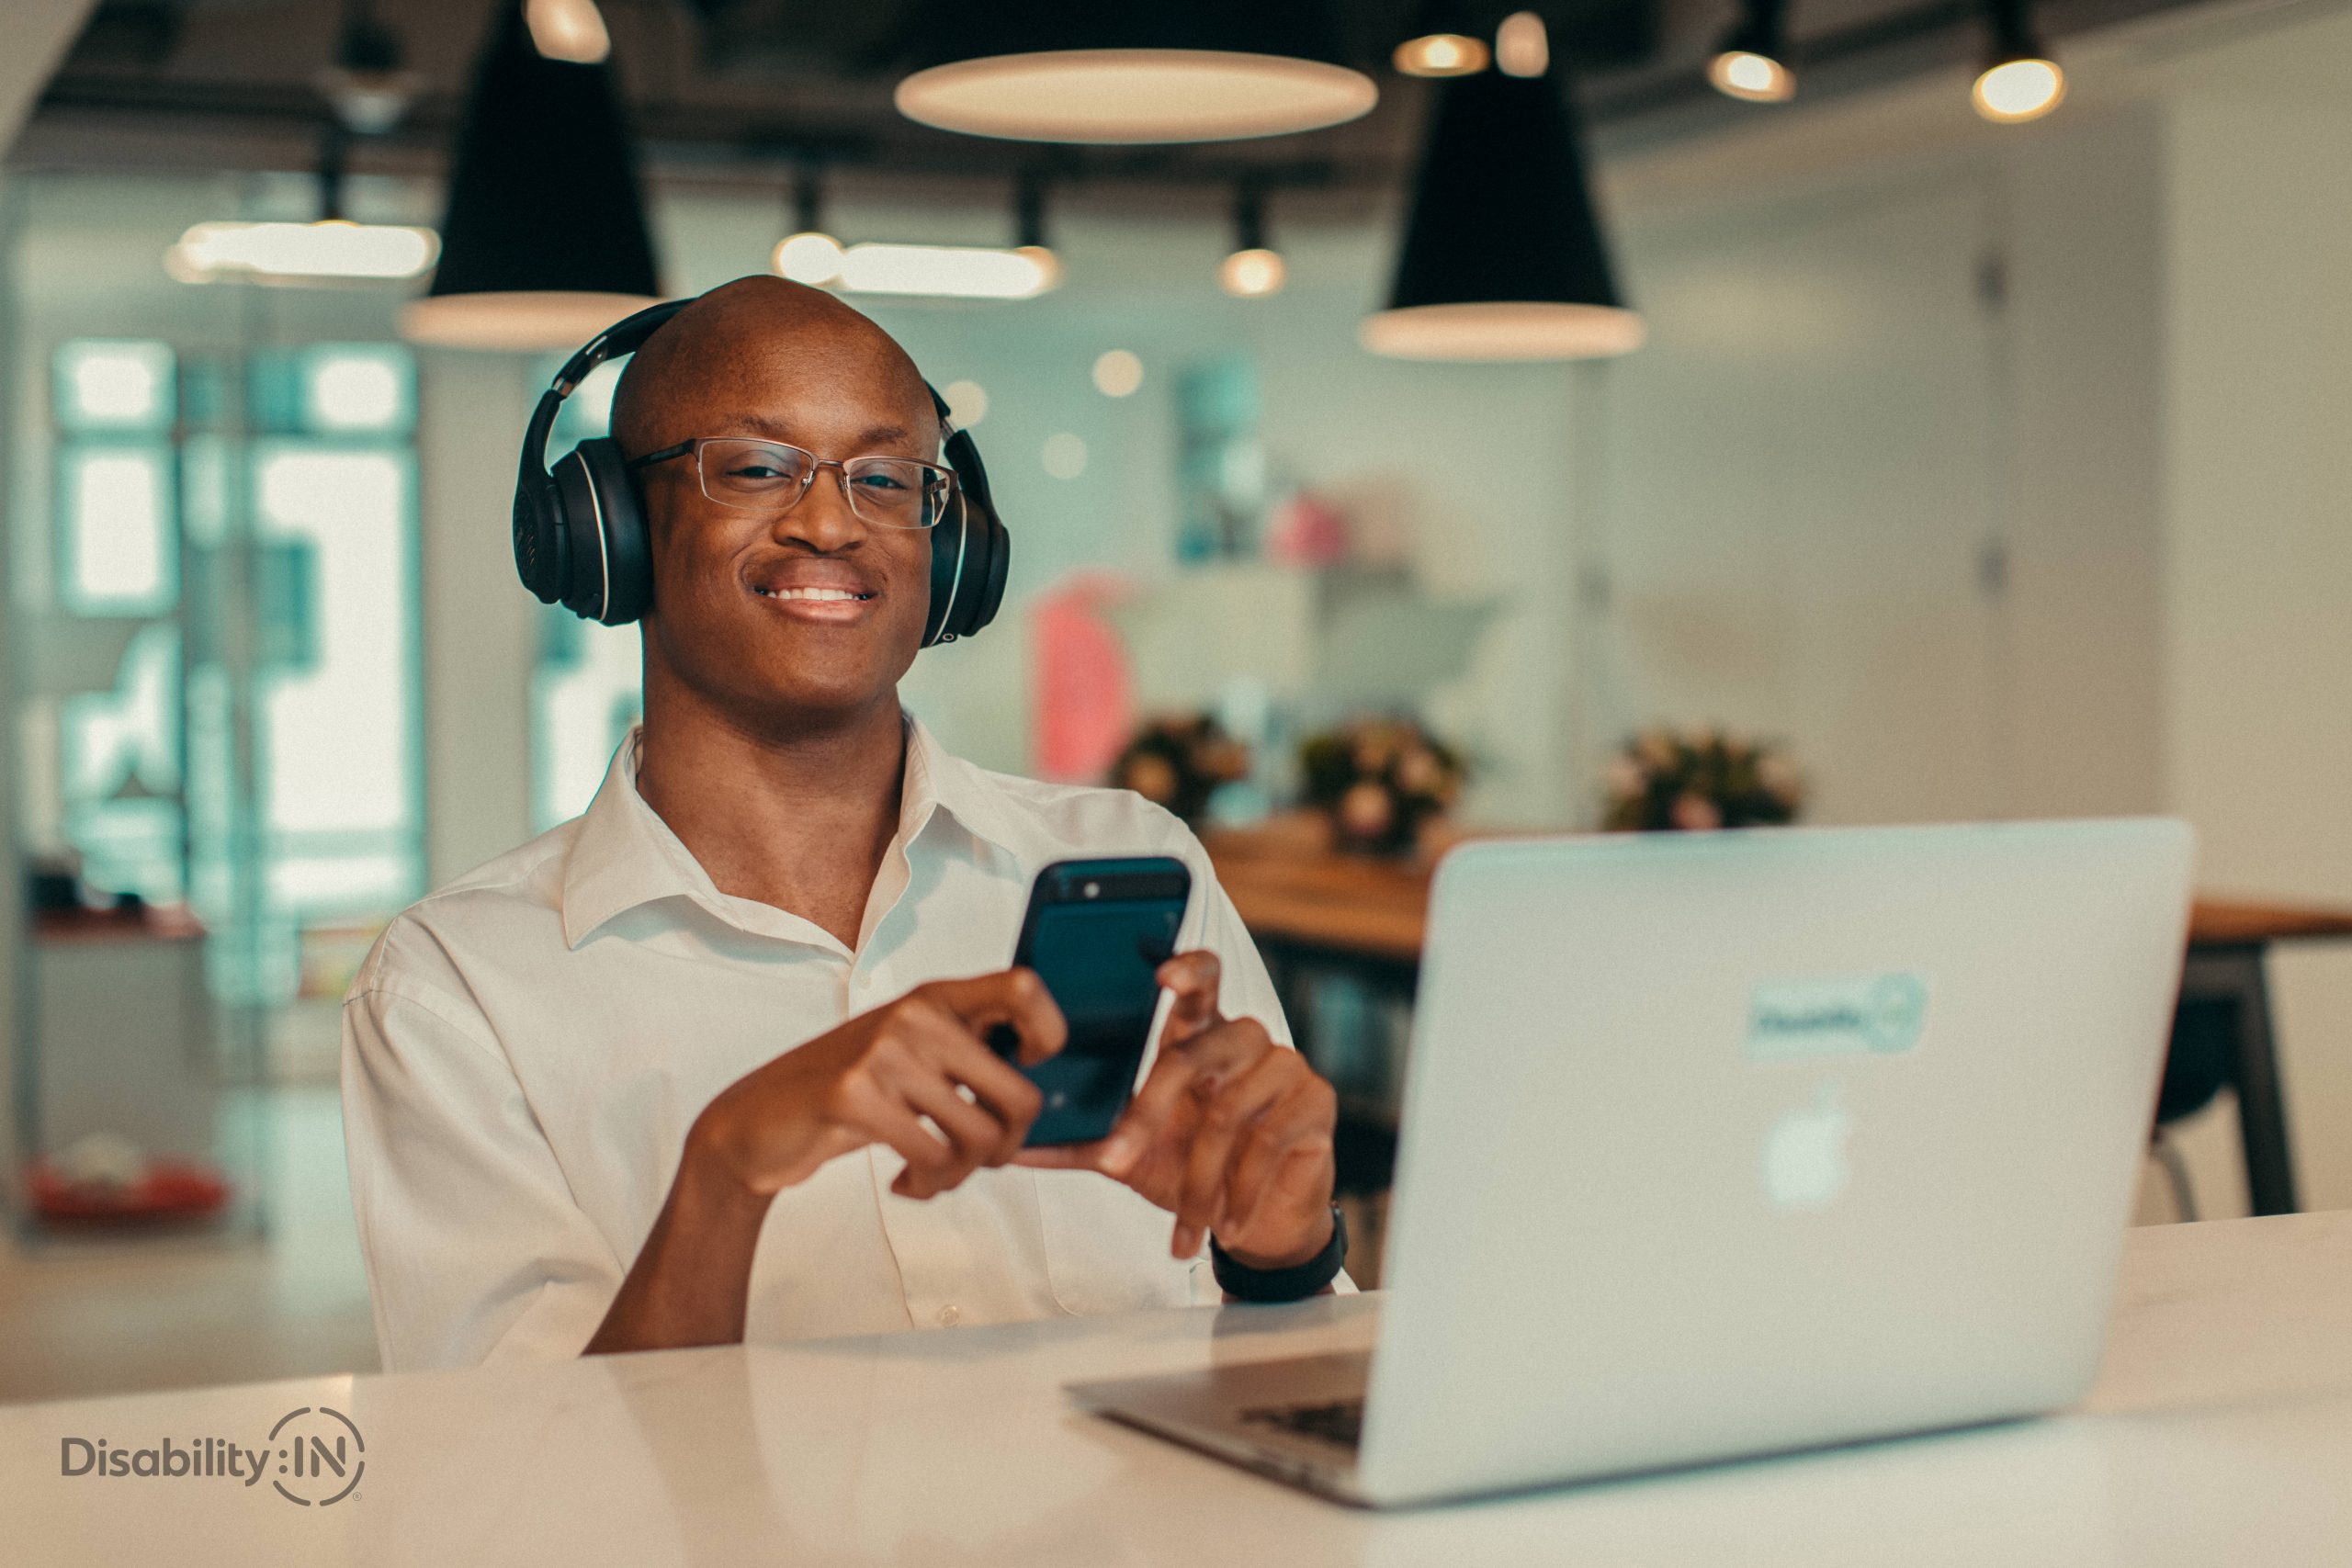 Black male wearing over the ear headphones, while listening to smartphones he is holding in his hands, sits in front of an open laptop.